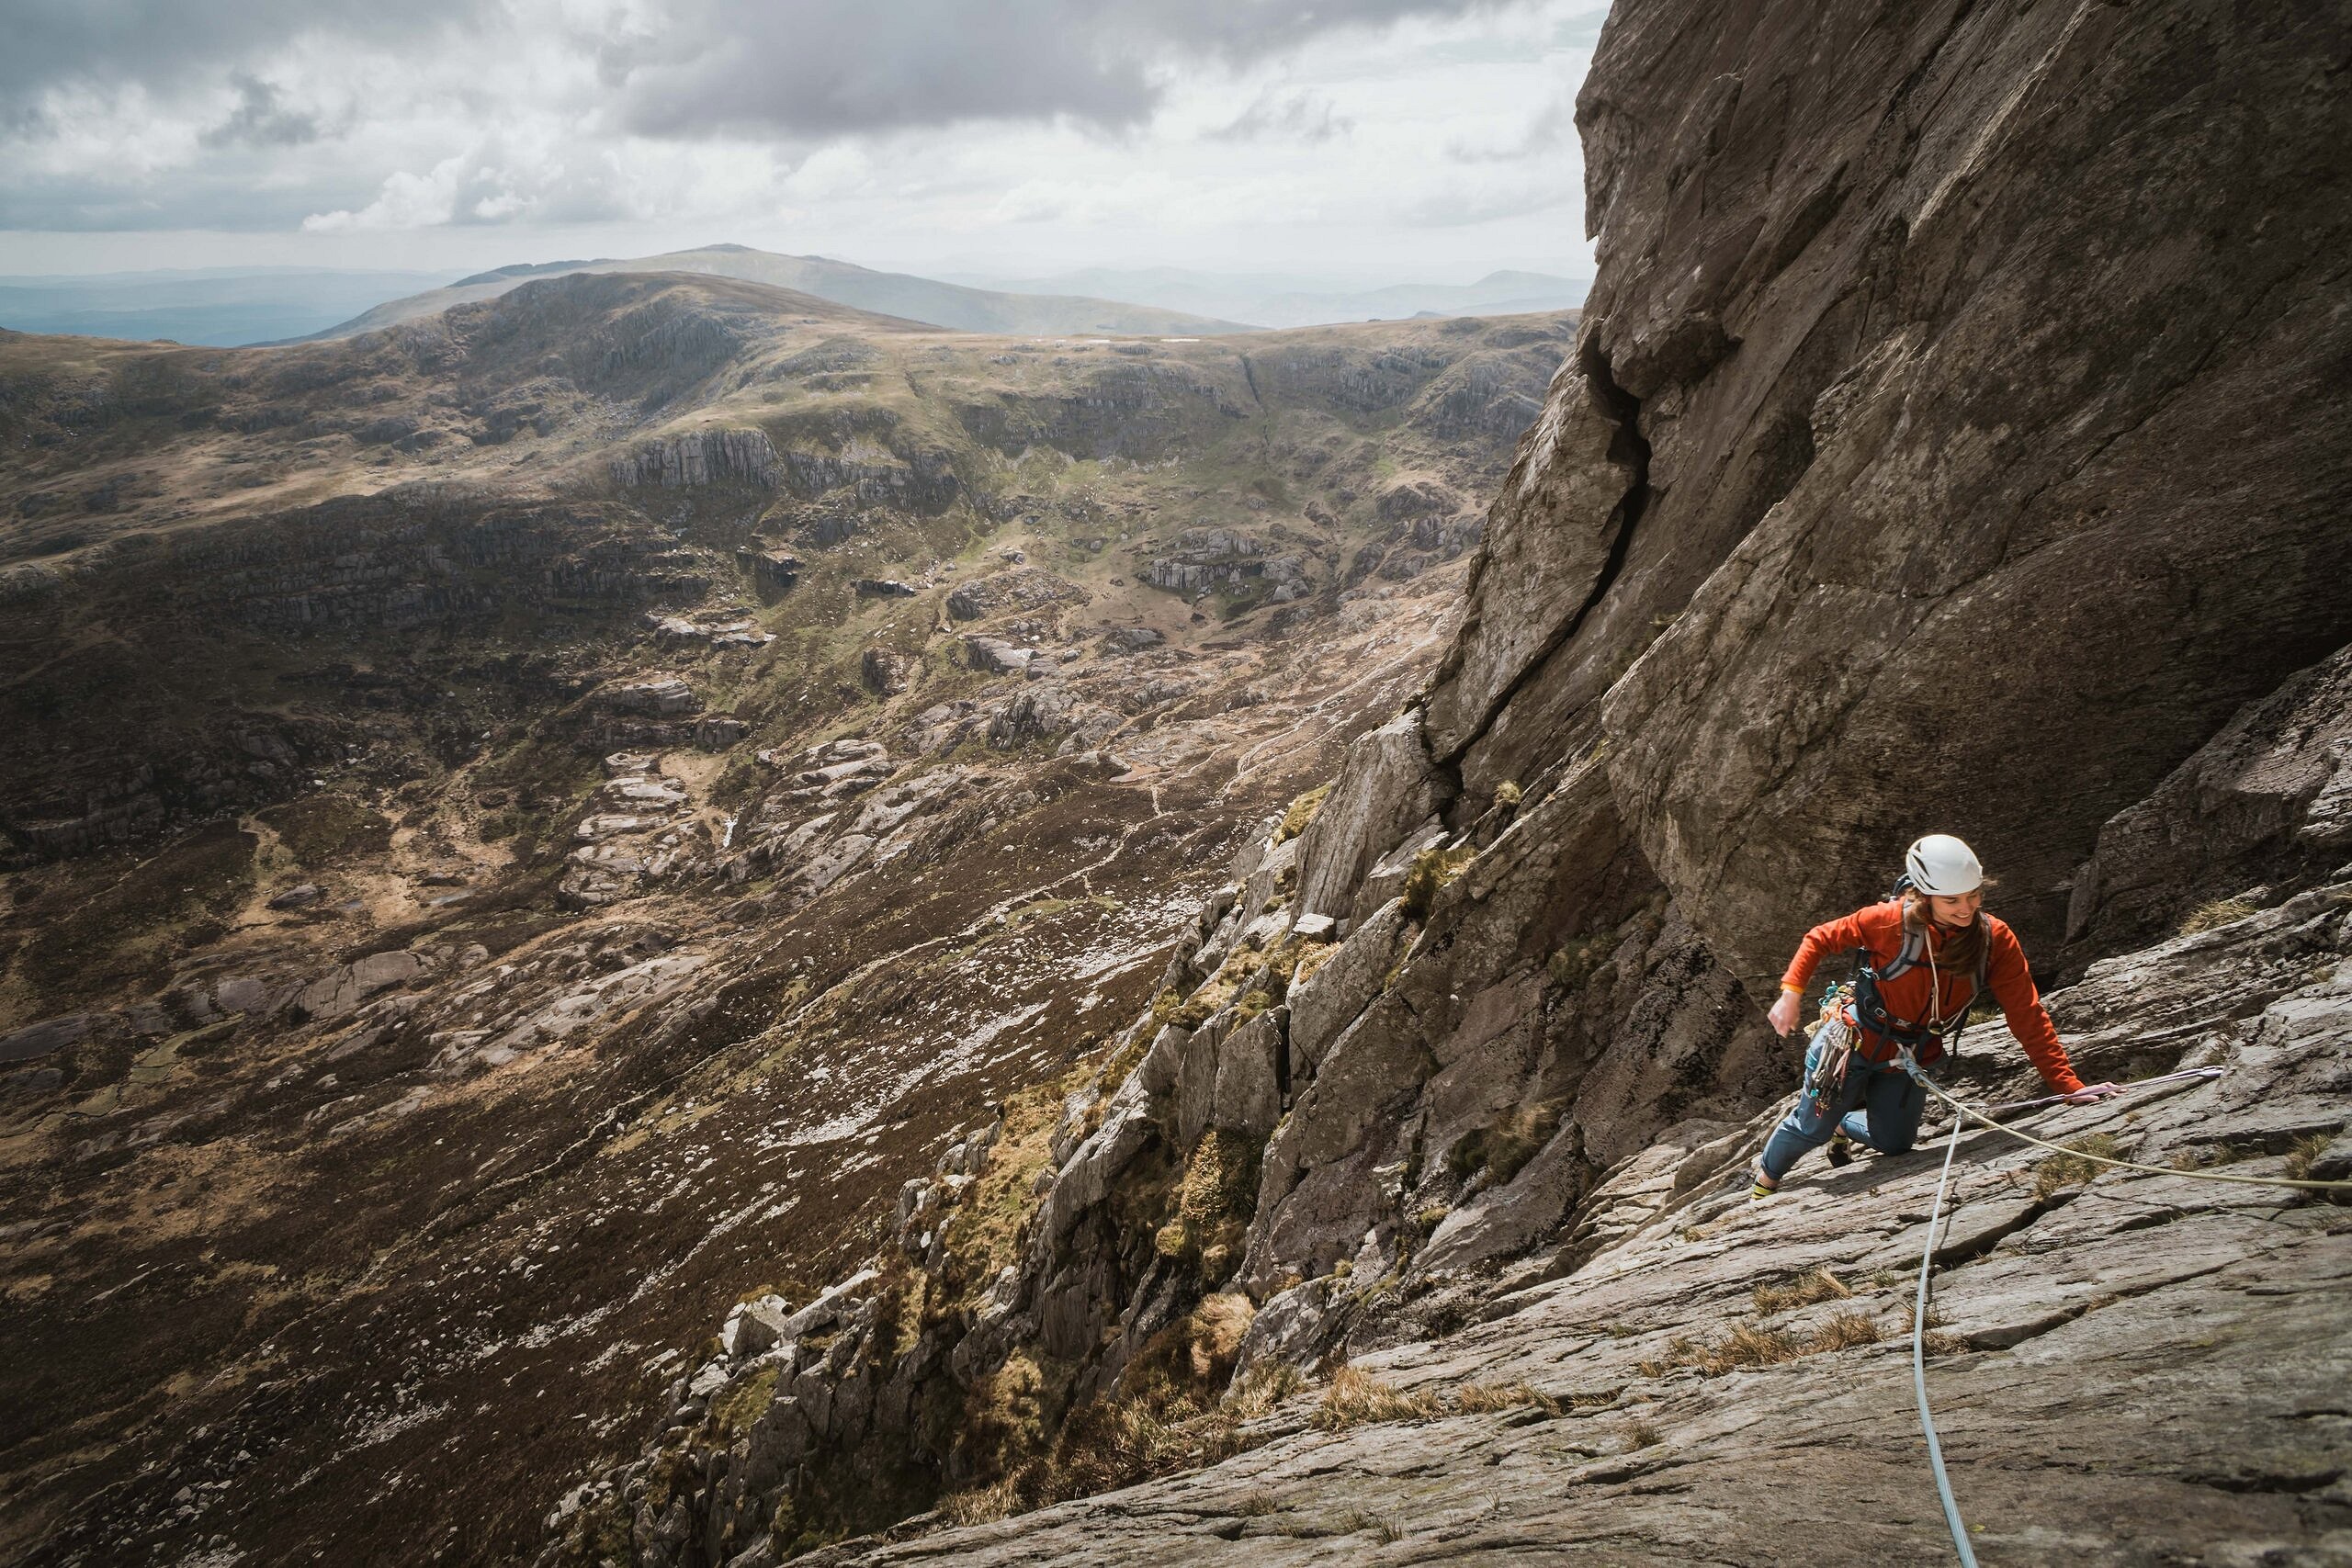 The Knight's move pitch on Grooved Arete.   © tmwltn